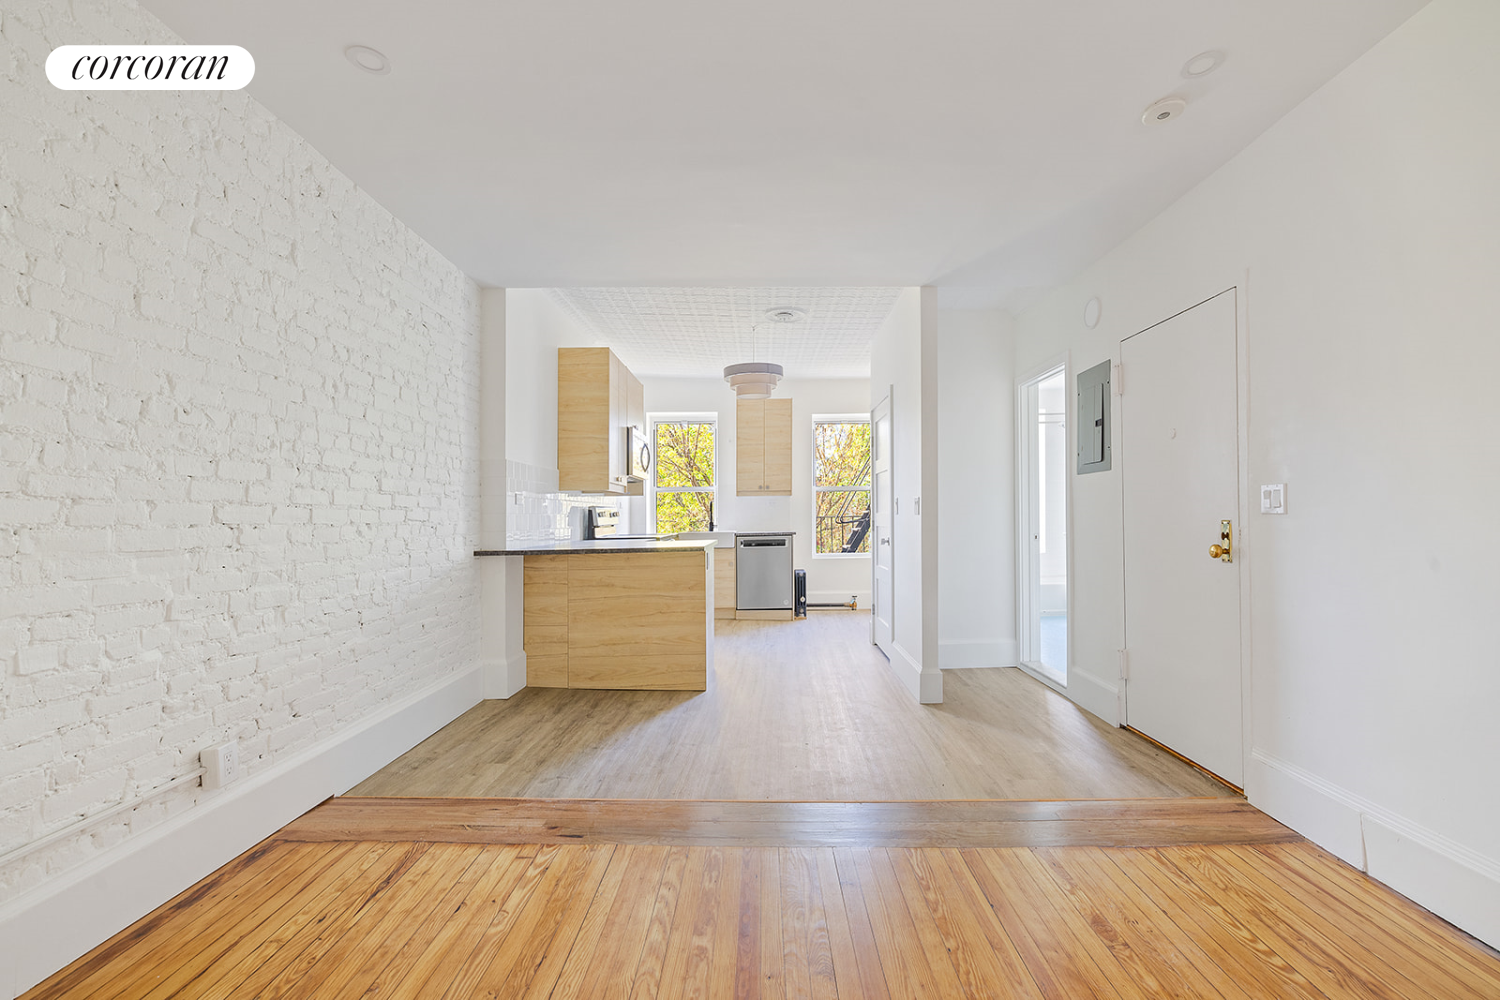 86 4th Place 2, Carroll Gardens, Brooklyn, New York - 1 Bedrooms  
1 Bathrooms  
4 Rooms - 